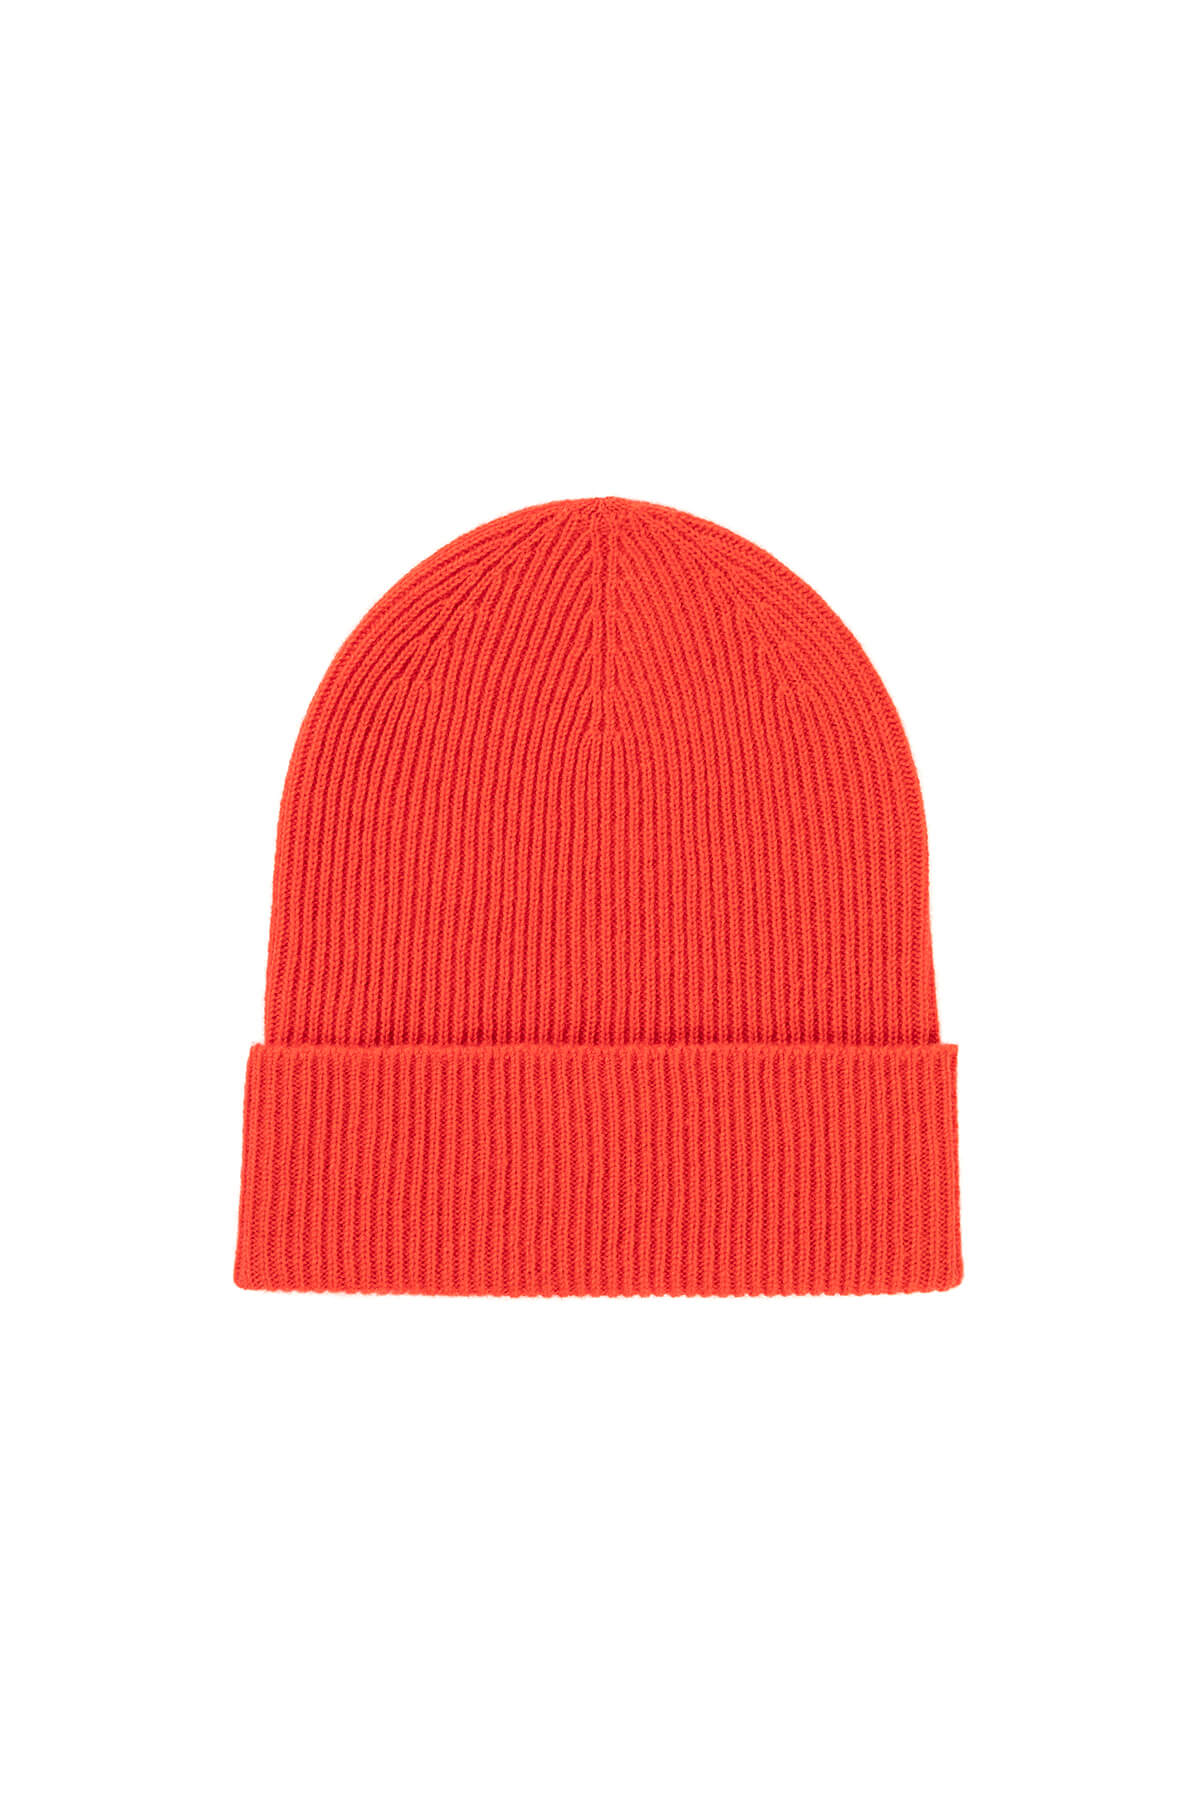 Johnstons of Elgin’s Orkney Red Slouchy Ribbed Cashmere Beanie on white background HAE03325SE0661